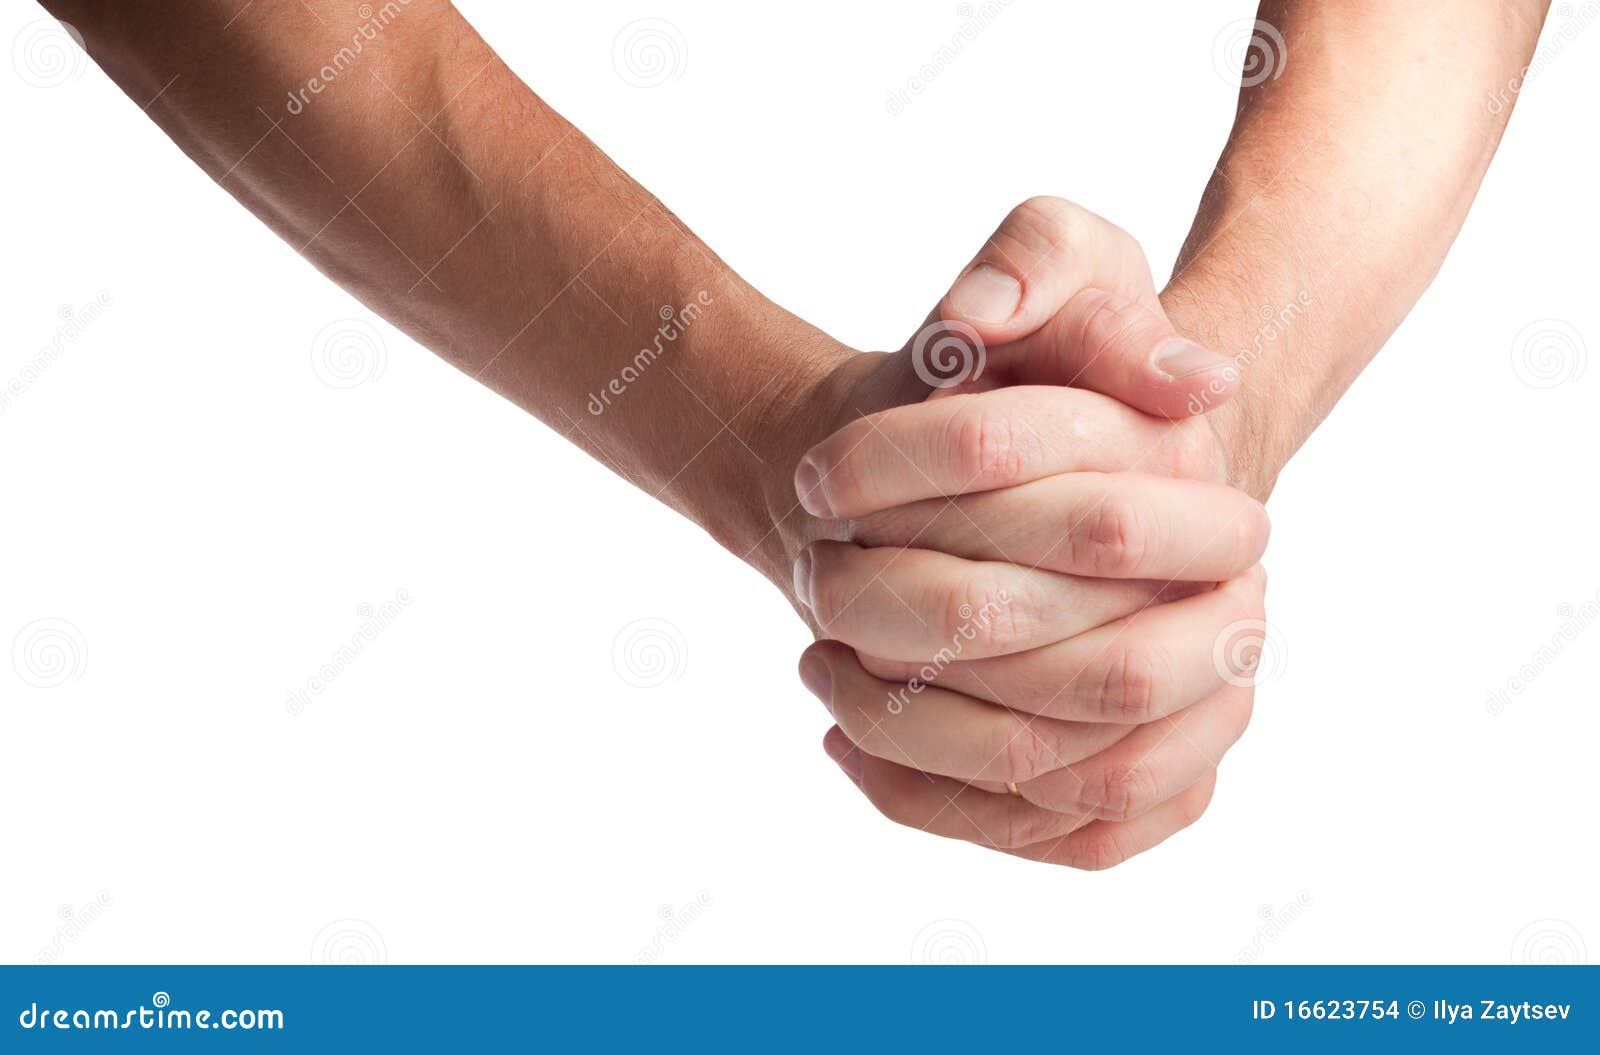 Hand Gesture: Fingers Interlaced Stock Images - Image: 16623754